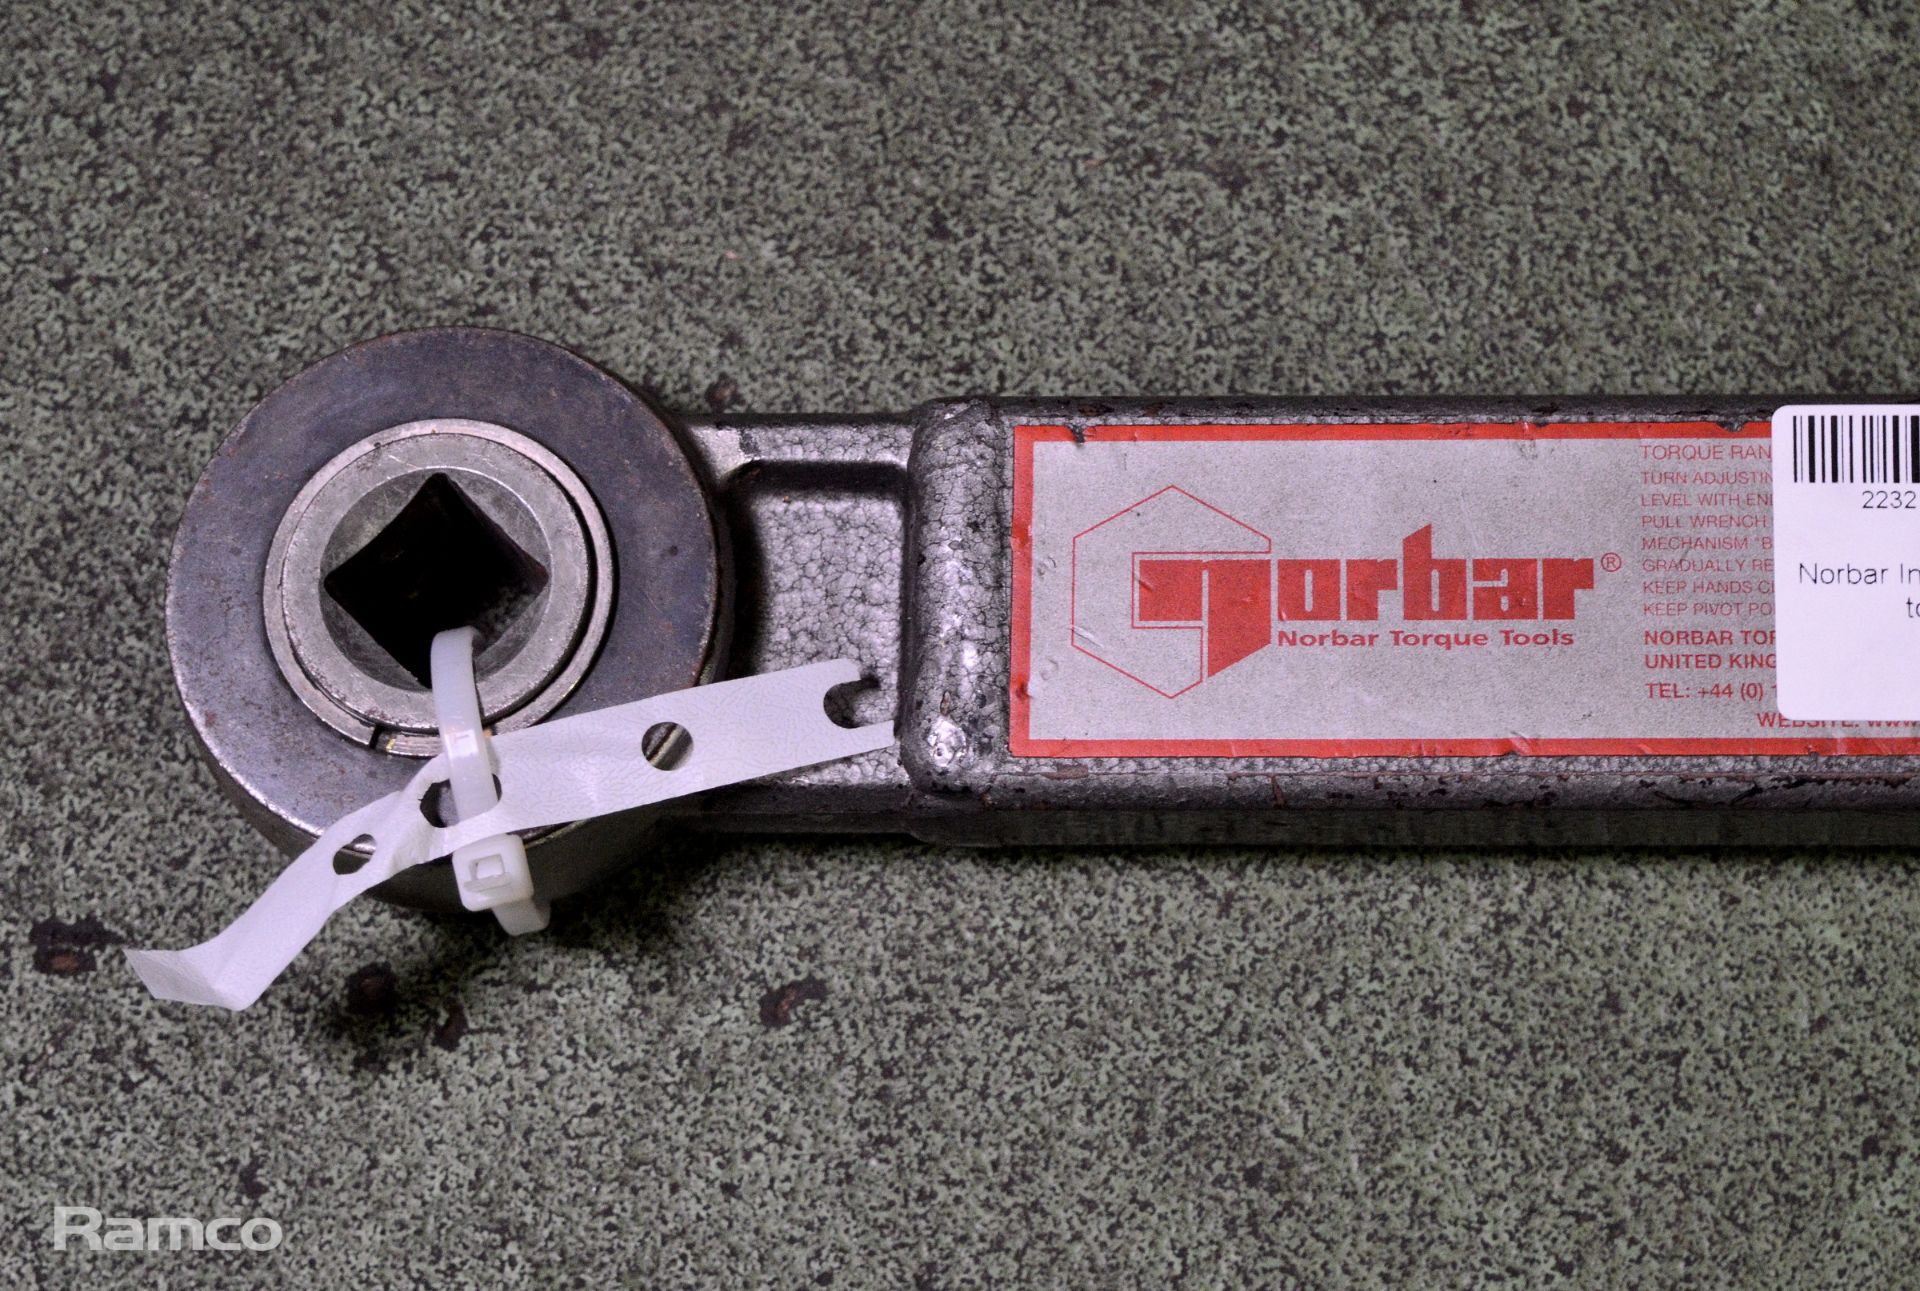 Norbar Industrial 4R, 3/4" torque wrench - Image 2 of 3